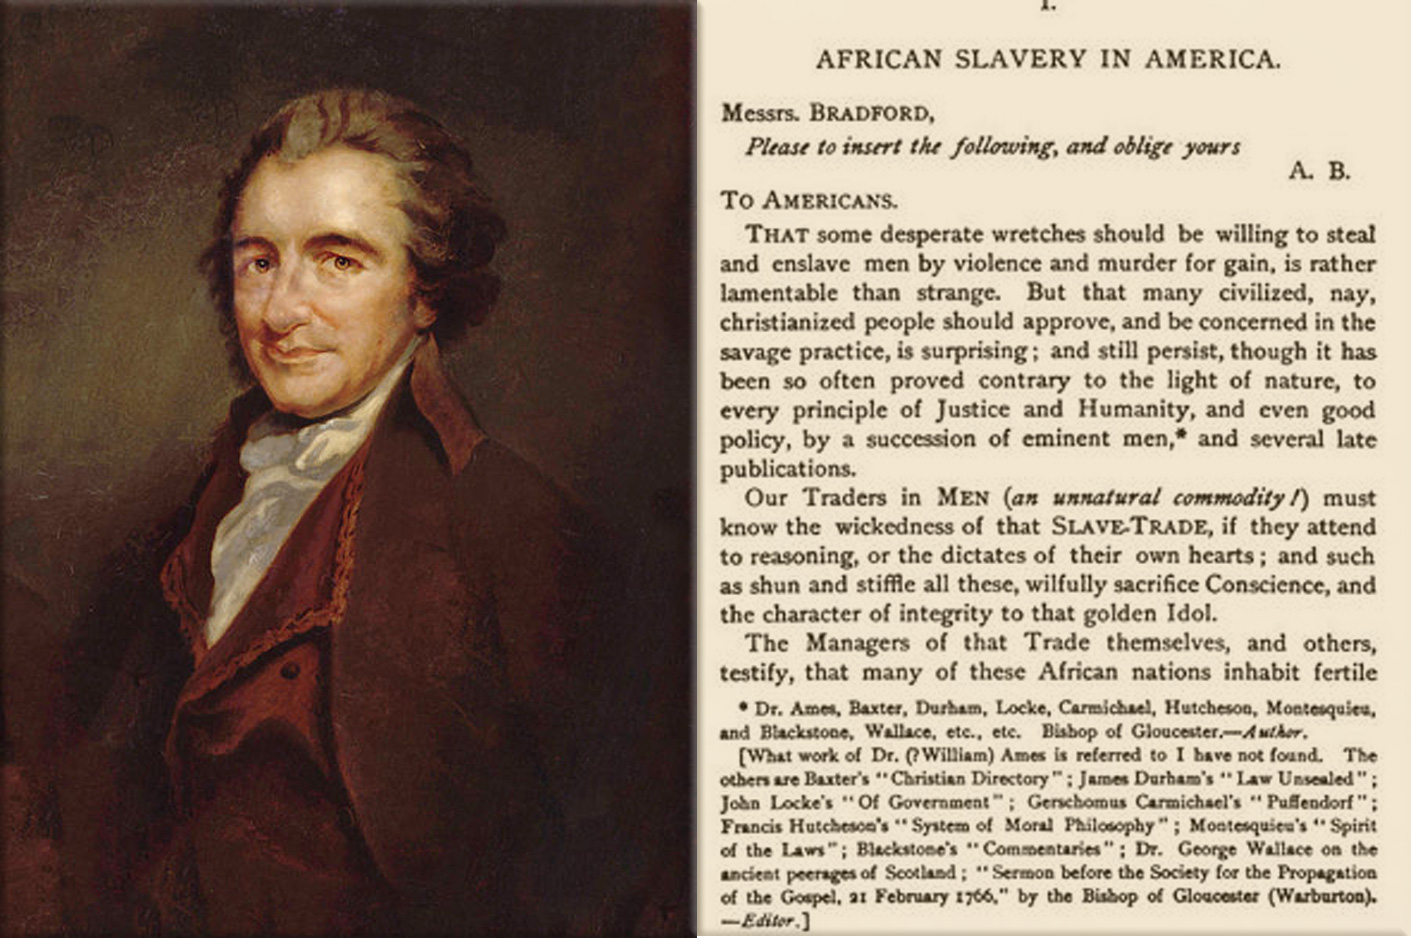 An anonymous writer, thought by some to be Thomas Paine, publishes 'African Slavery in America', the first article in the American colonies calling for the emancipation of slaves and the abolition of slavery